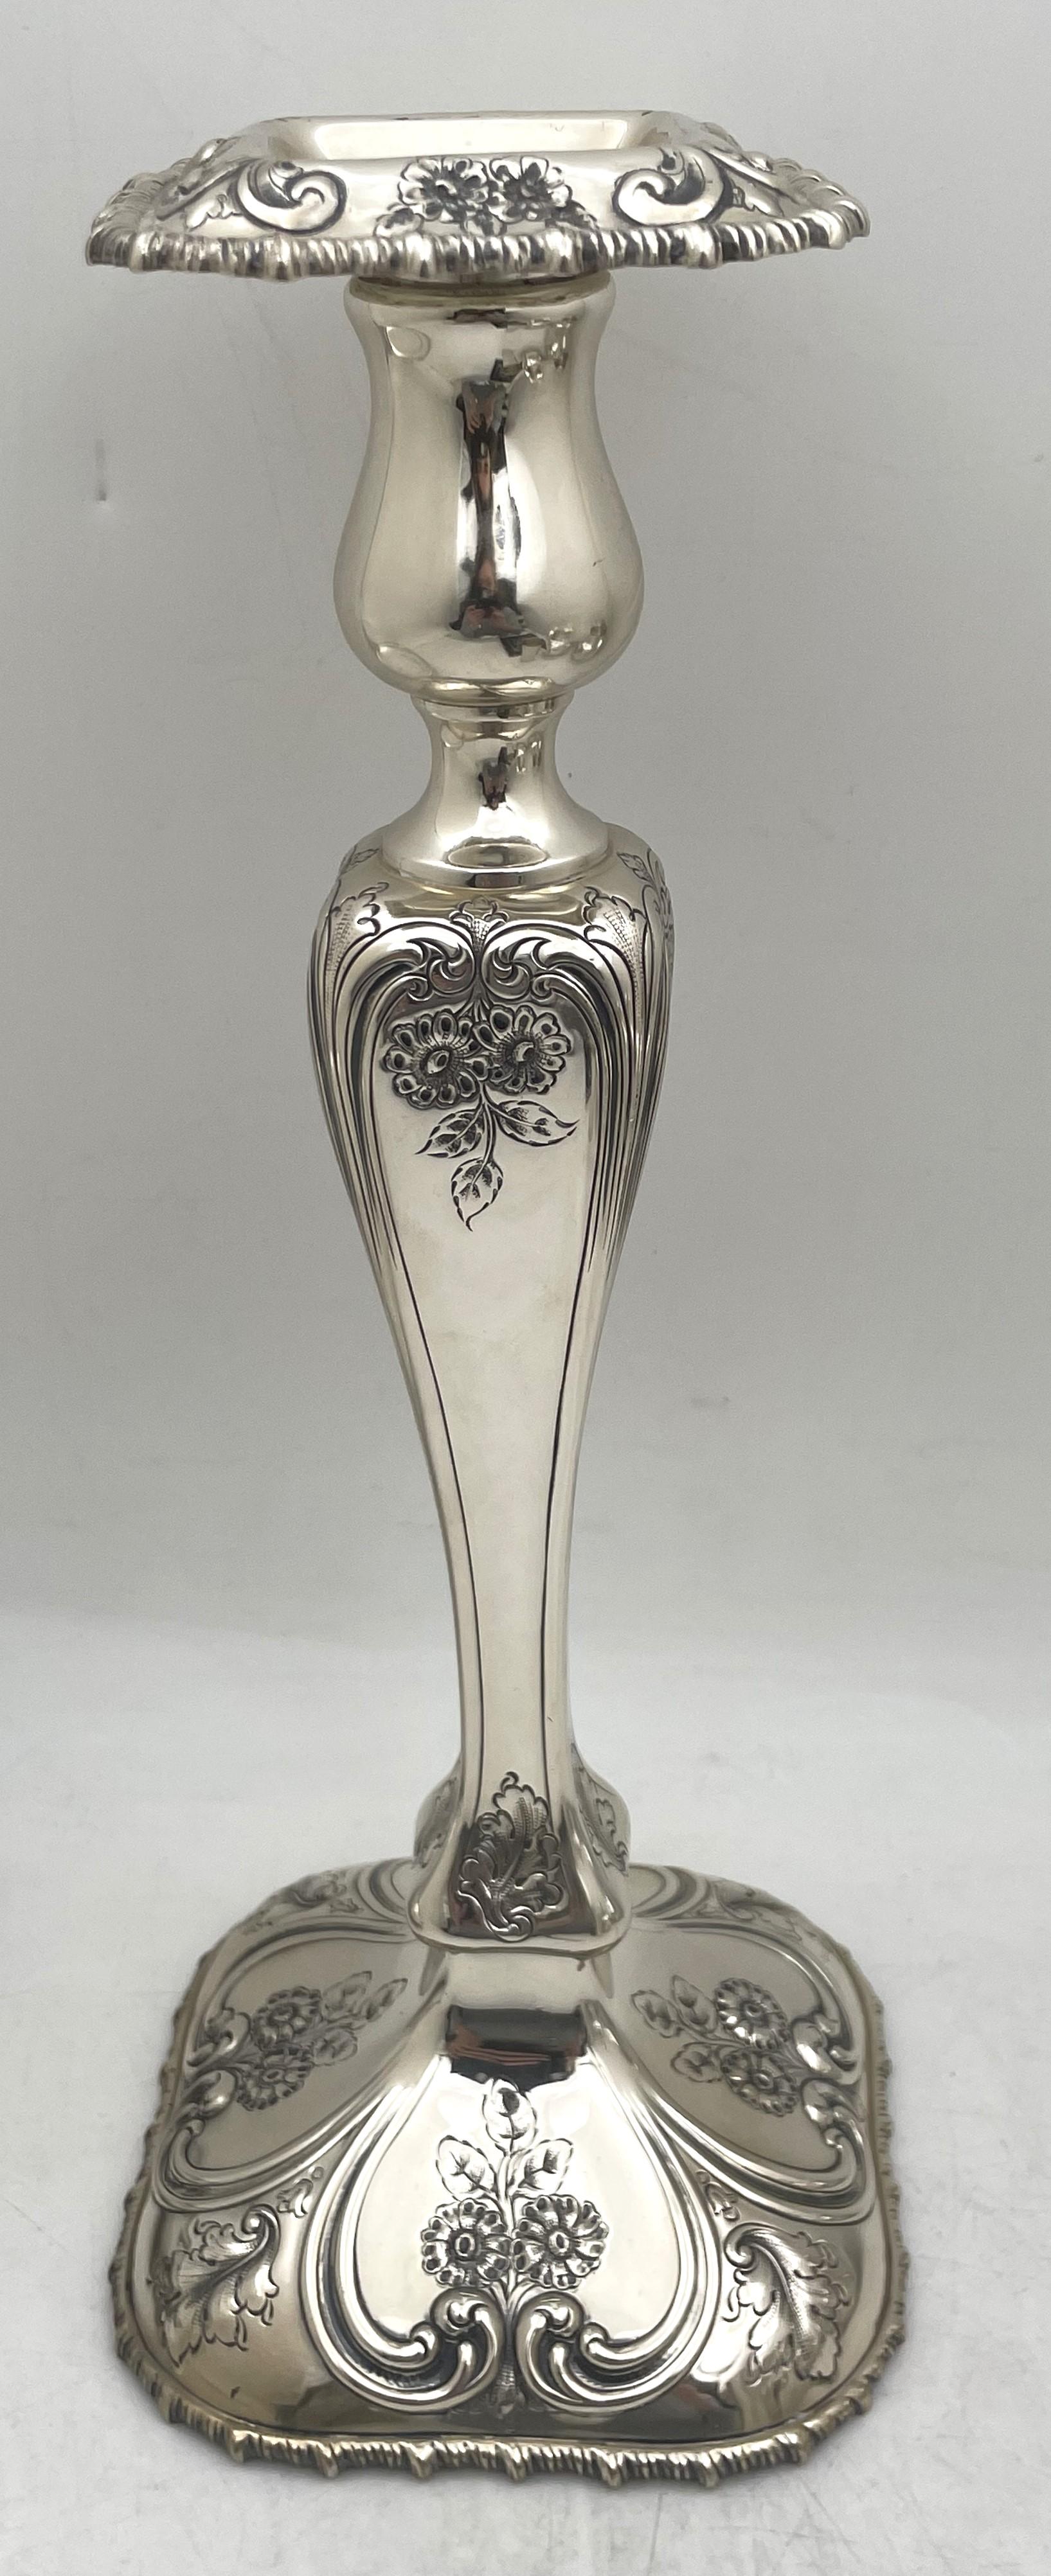 Shreve & Co. set of 4 sterling silver candlesticks in Art Nouveau style from the early 20th century, beautifully adorned with floral and curvilinear motifs. They measure 12 3/4'' in height by 5 1/4'' in depth, are weighted (gross weight is 110 troy